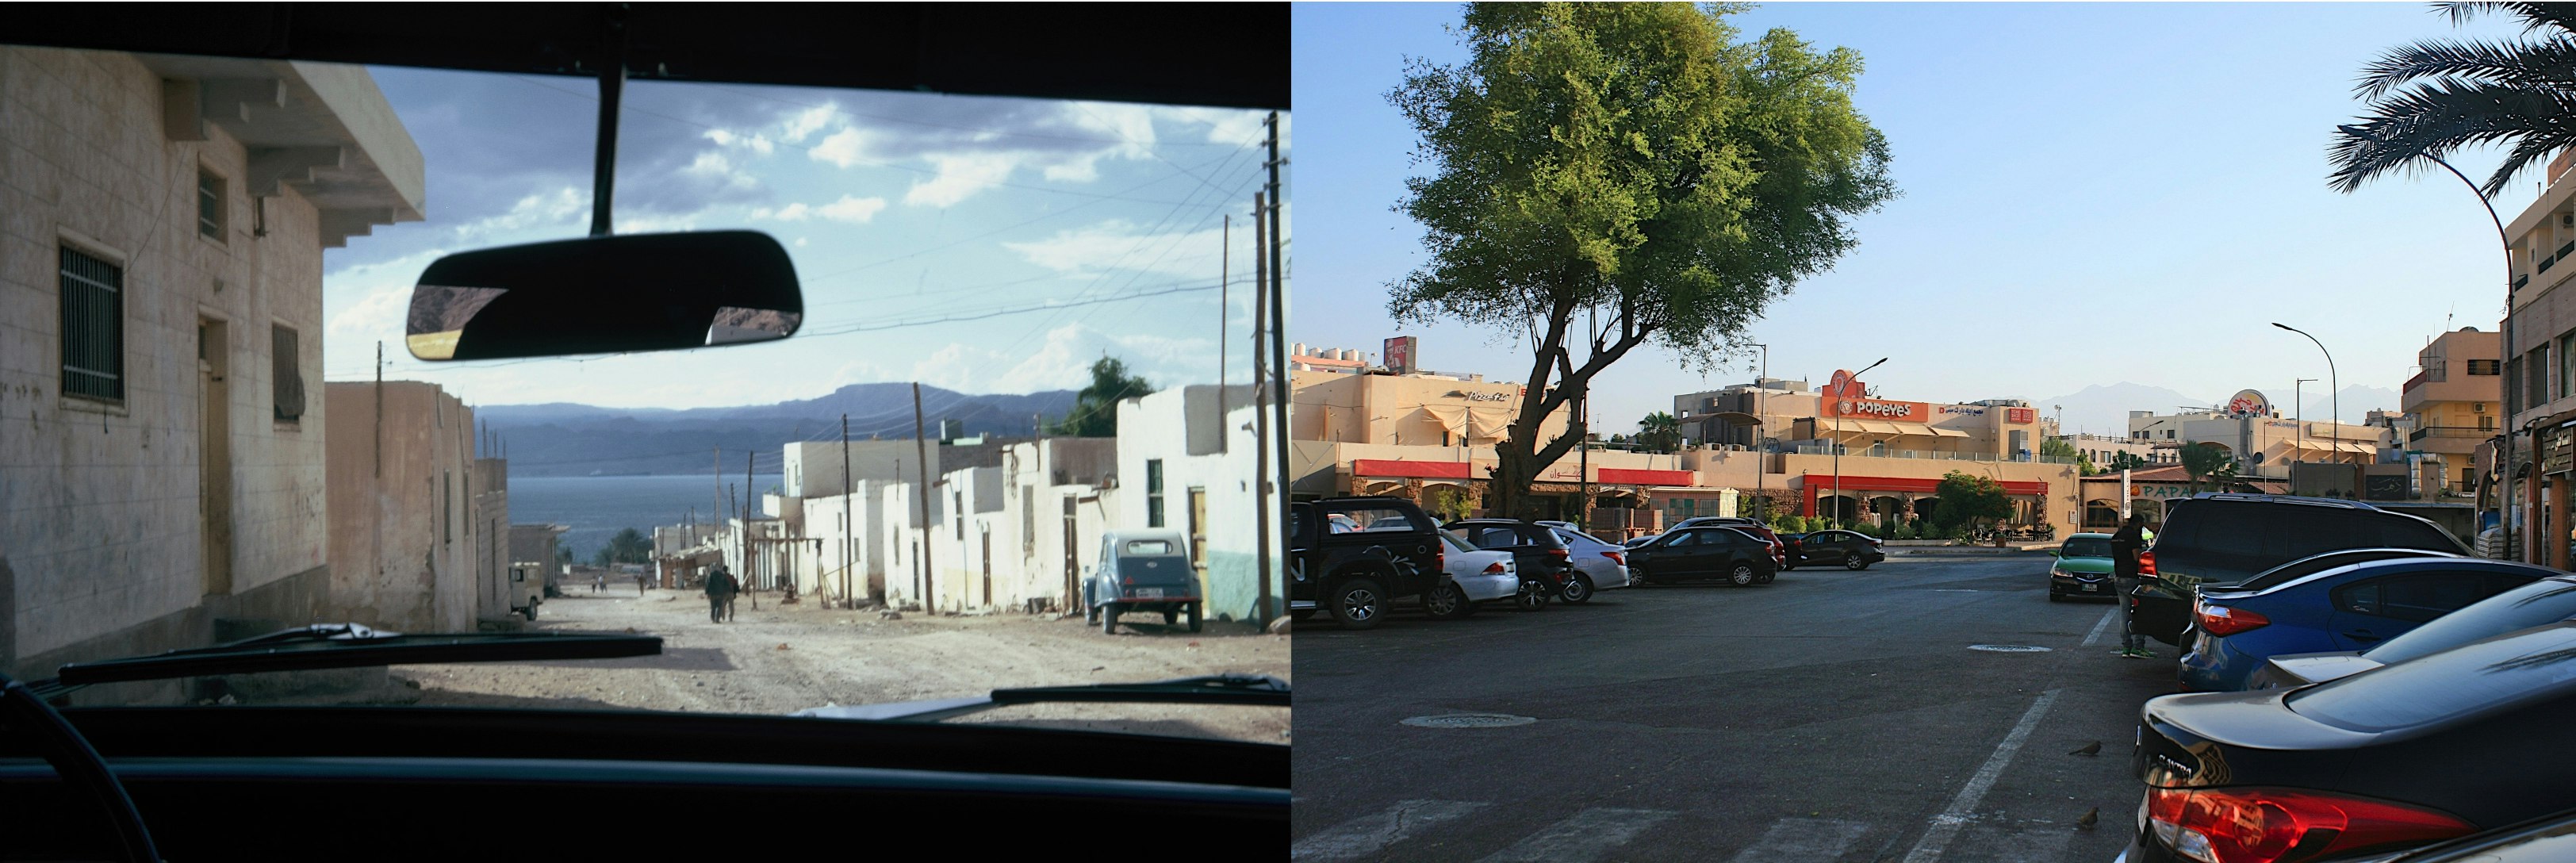 Two images side by side: the left is Aqaba in 1972, which is a dirt road and uniform sandstone buildings; the right is a modern view of a paved street and a built up city, complete with a Popeyes, a Pizza Hut and a Burger King in the distance.